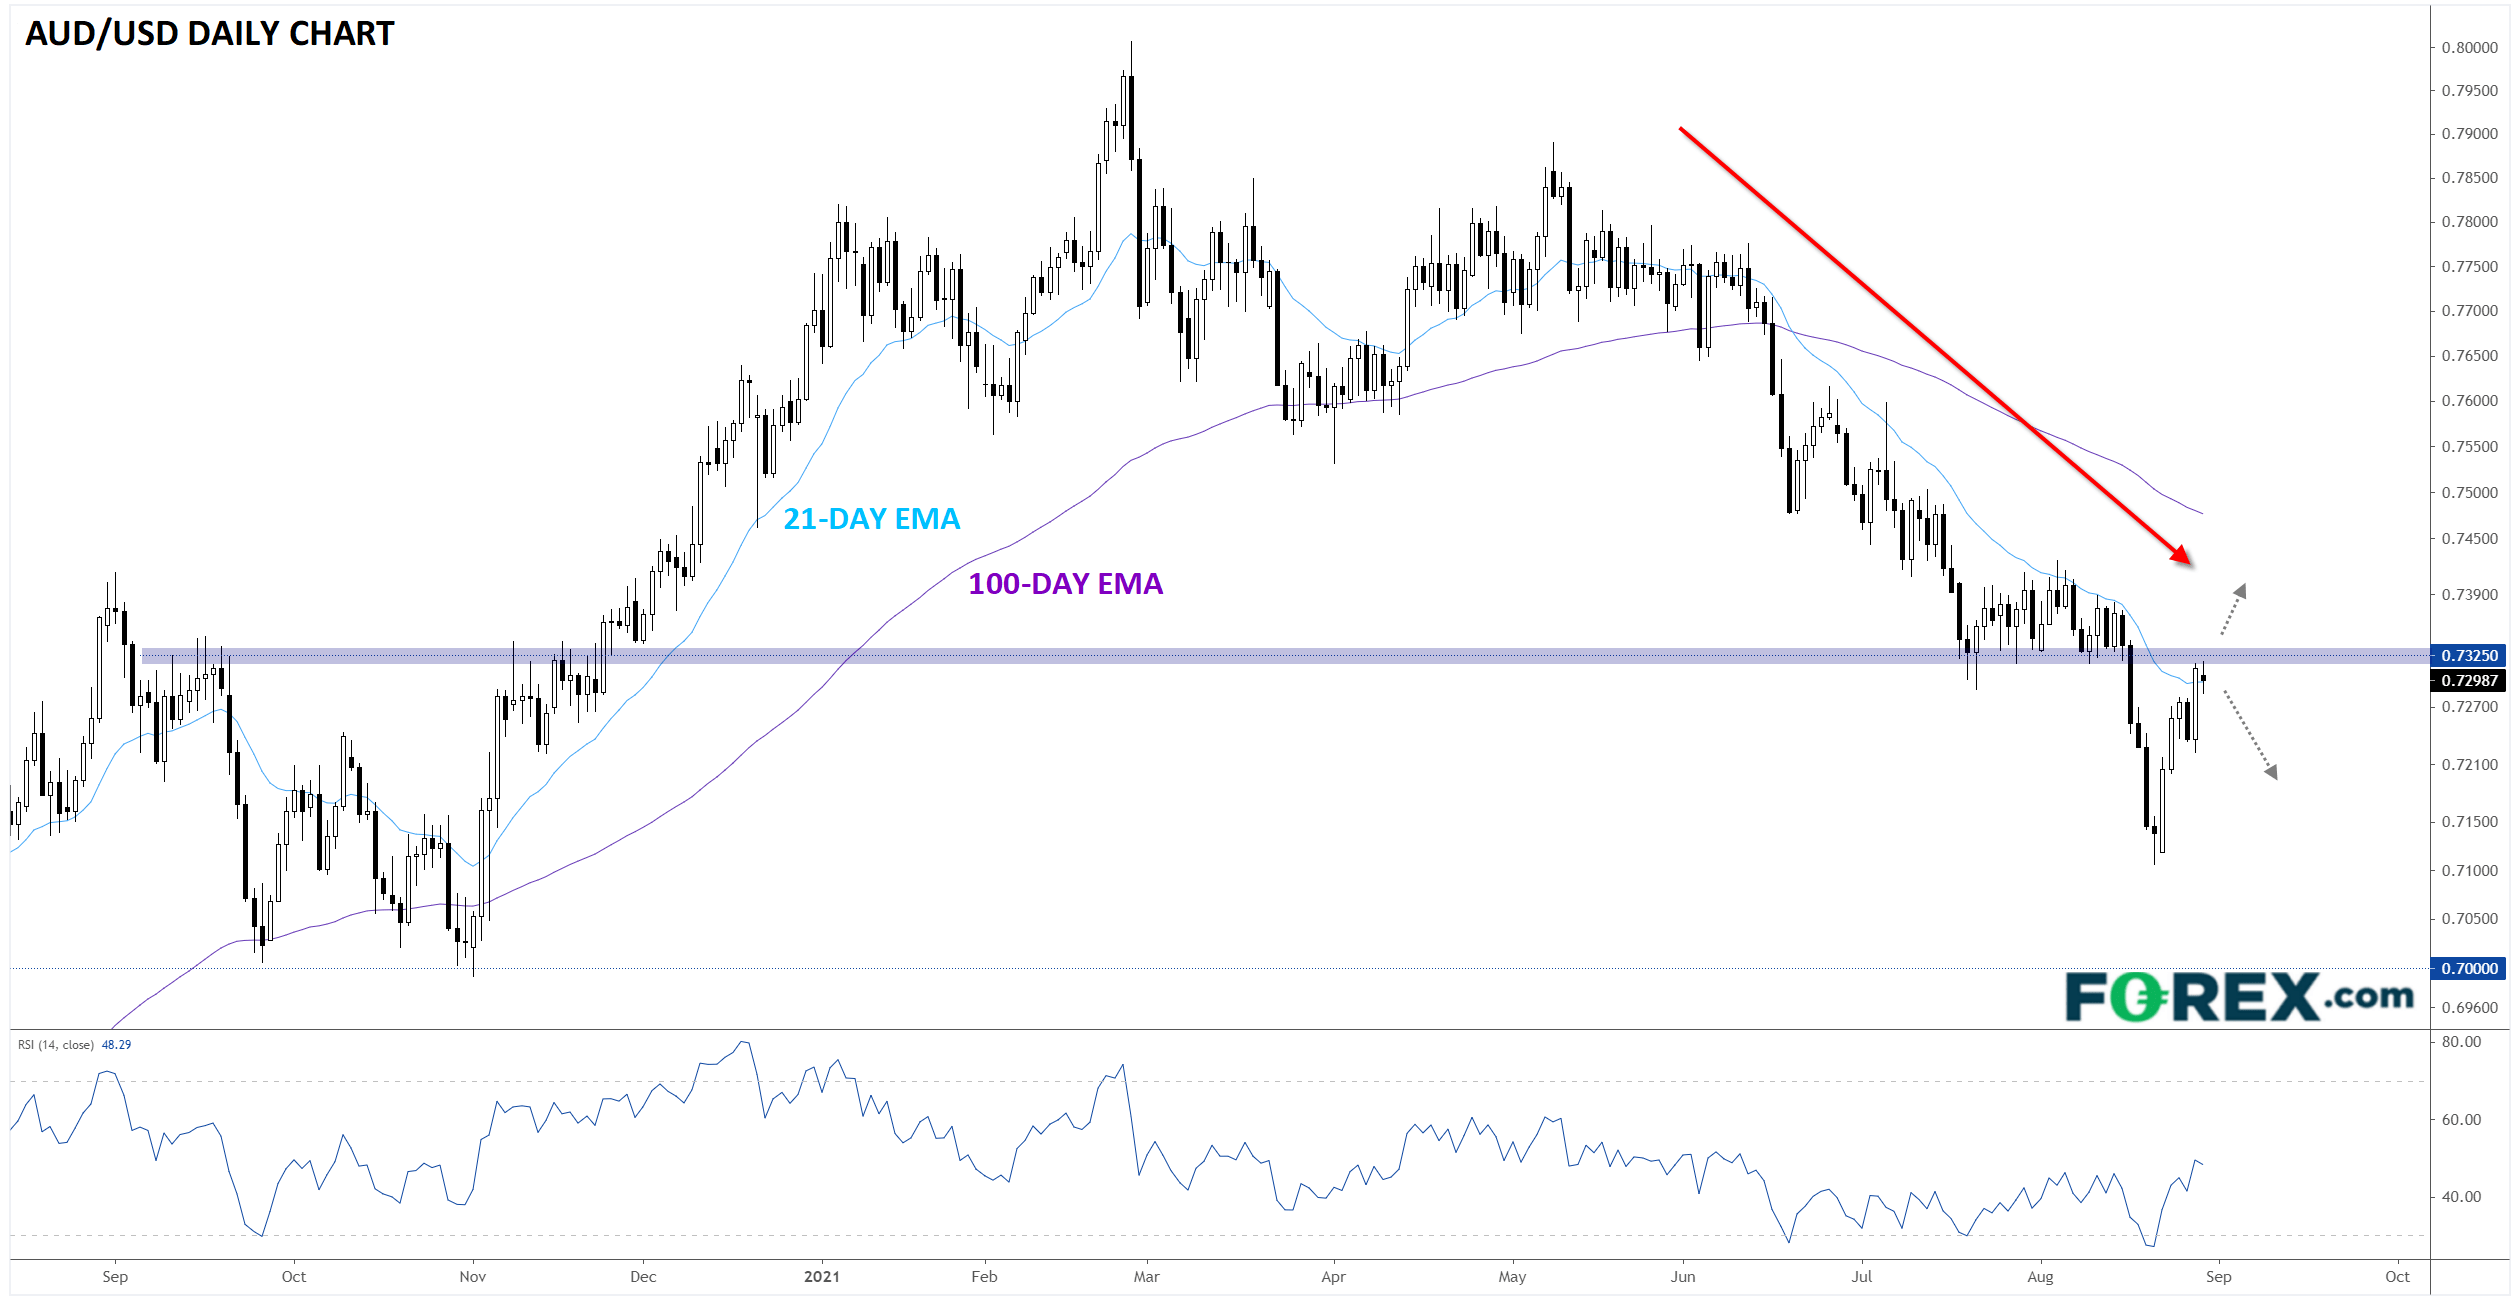 TradingView chart of AUD vs USD with technical analysis.  Analysed on August 2021 by FOREX.com